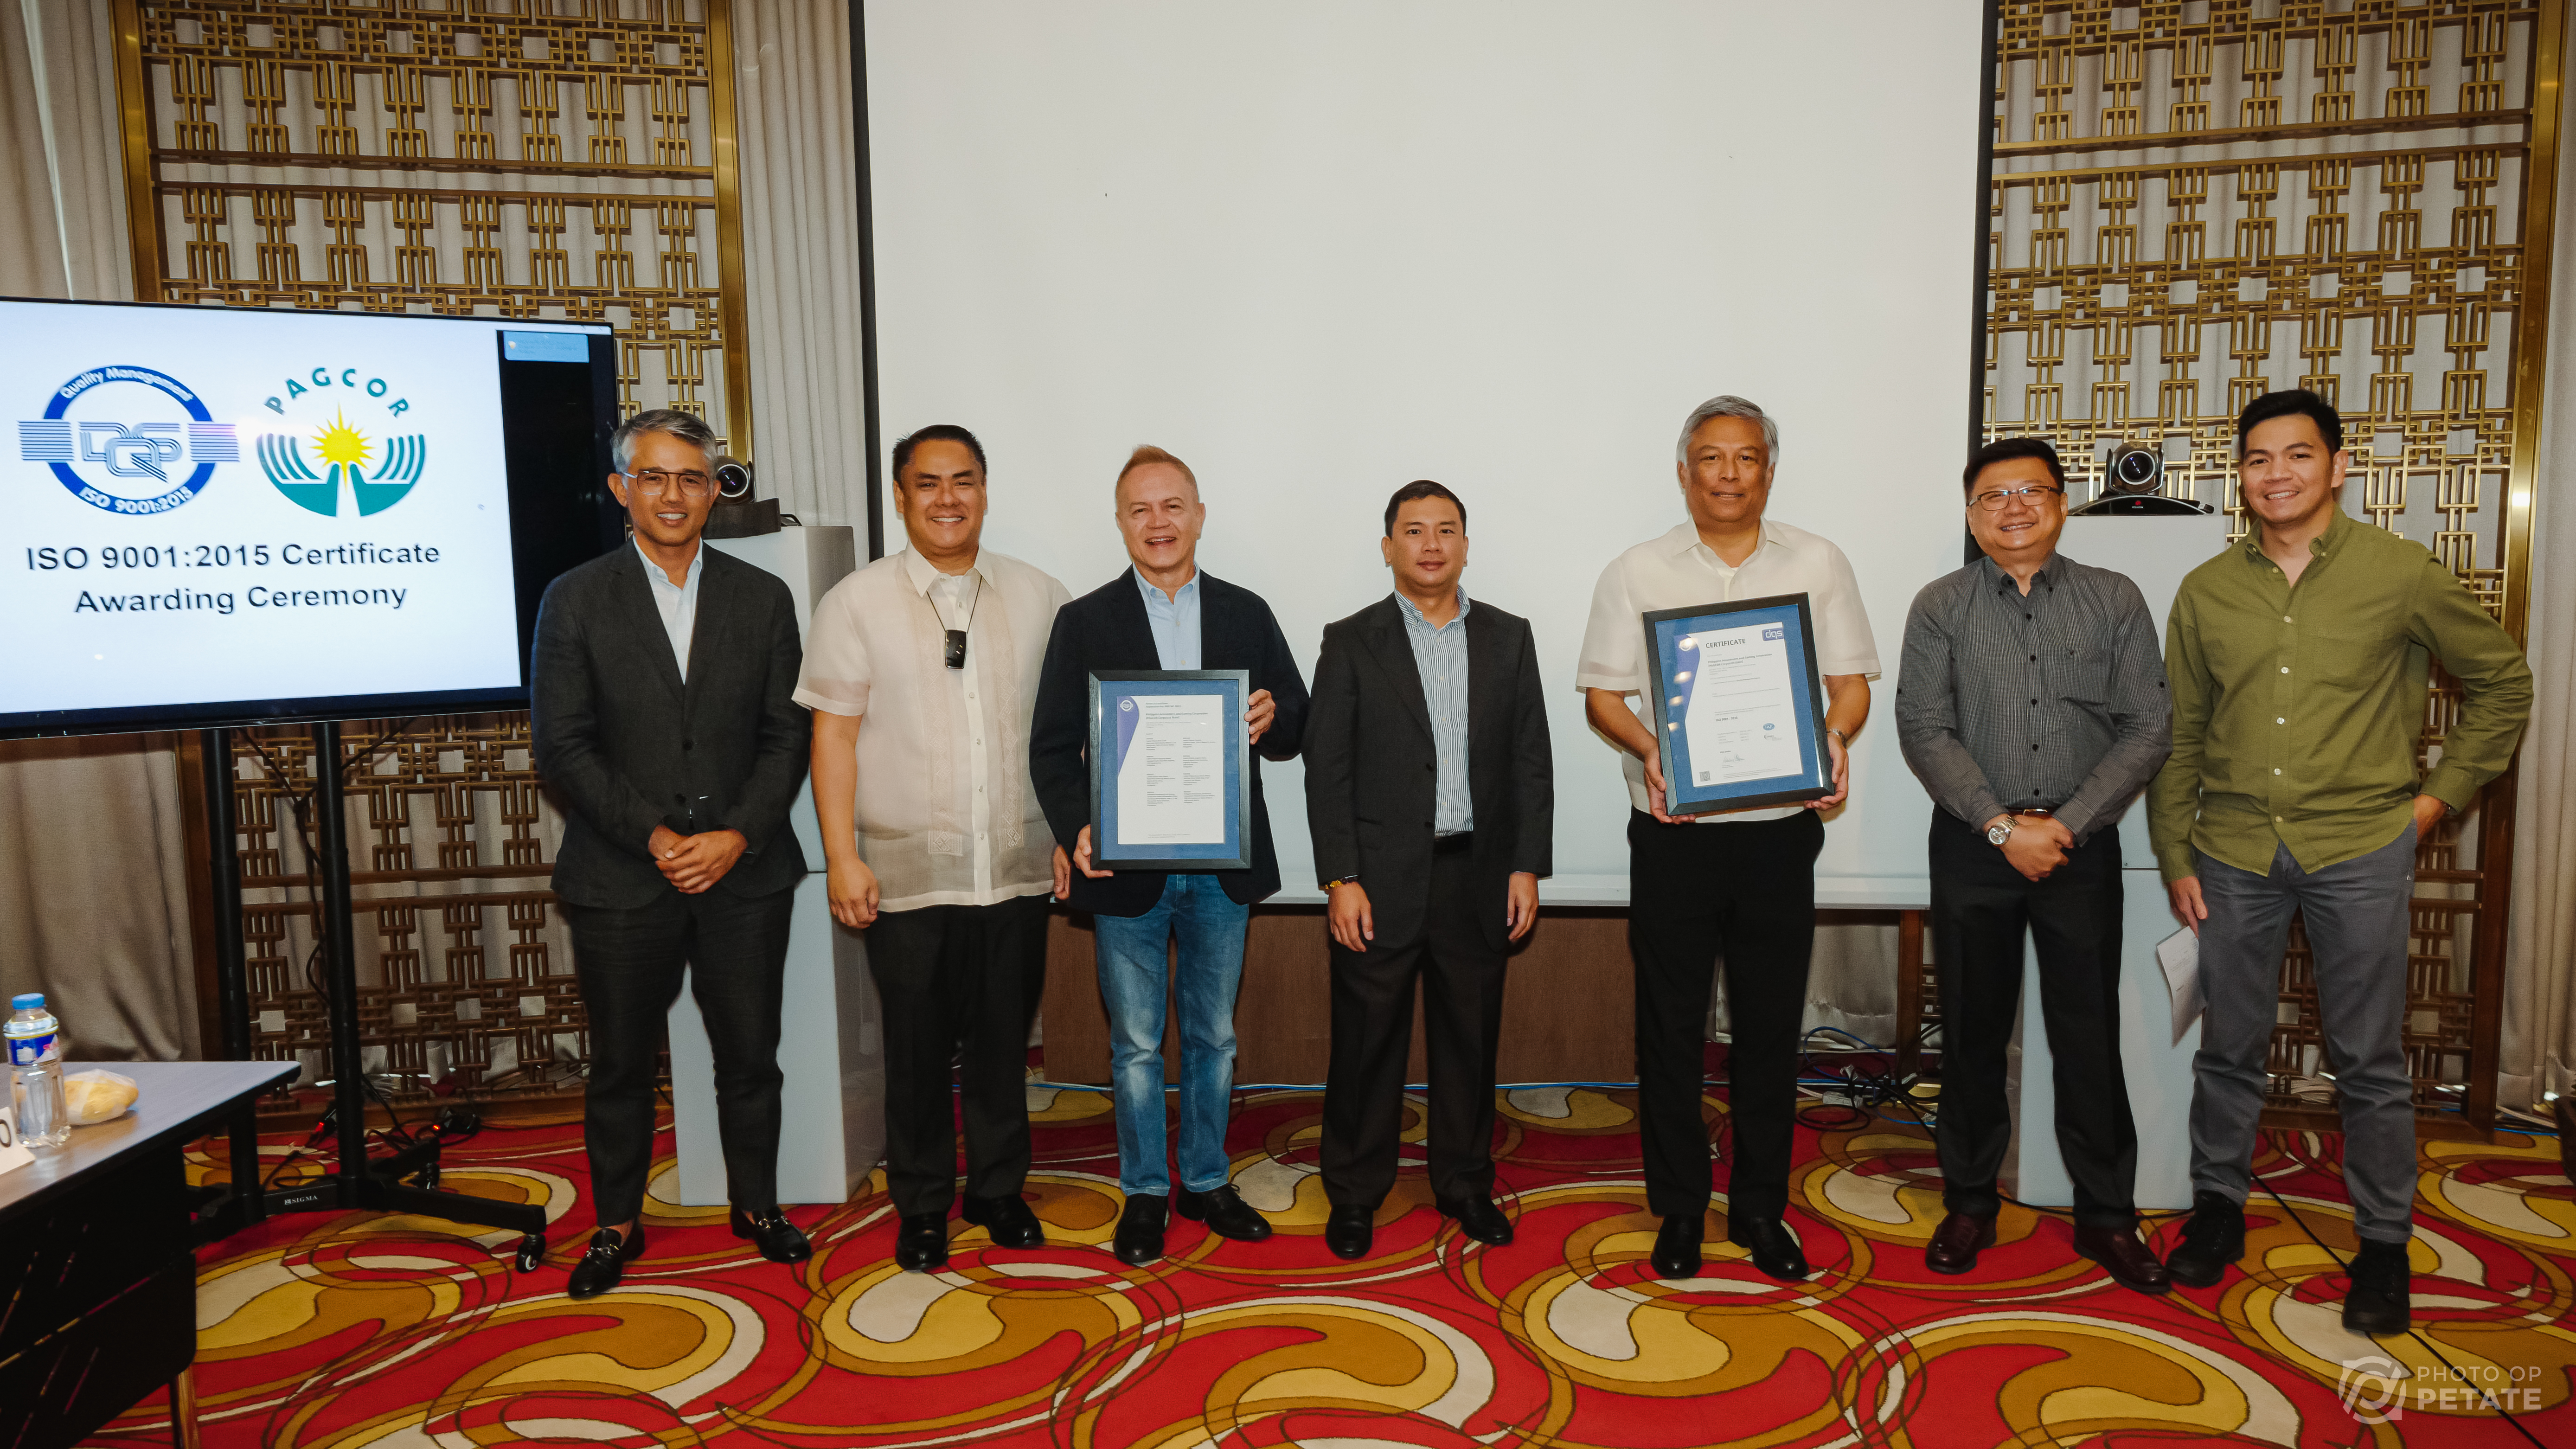 PAGCOR and AGENSBO365 recertified to ISO 9001:2015 for the third time